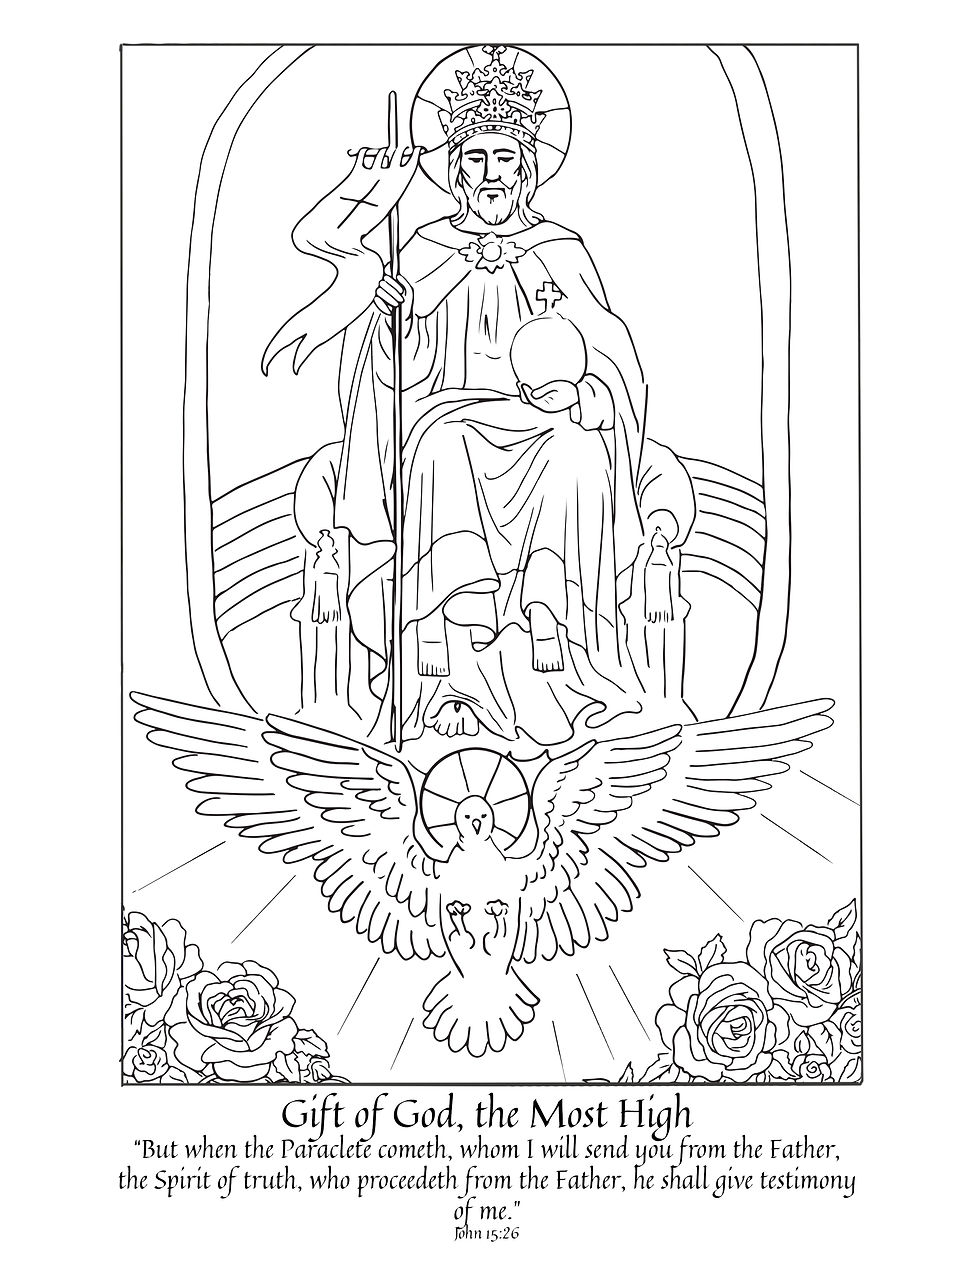 Easter coloring page set liturgy of the home